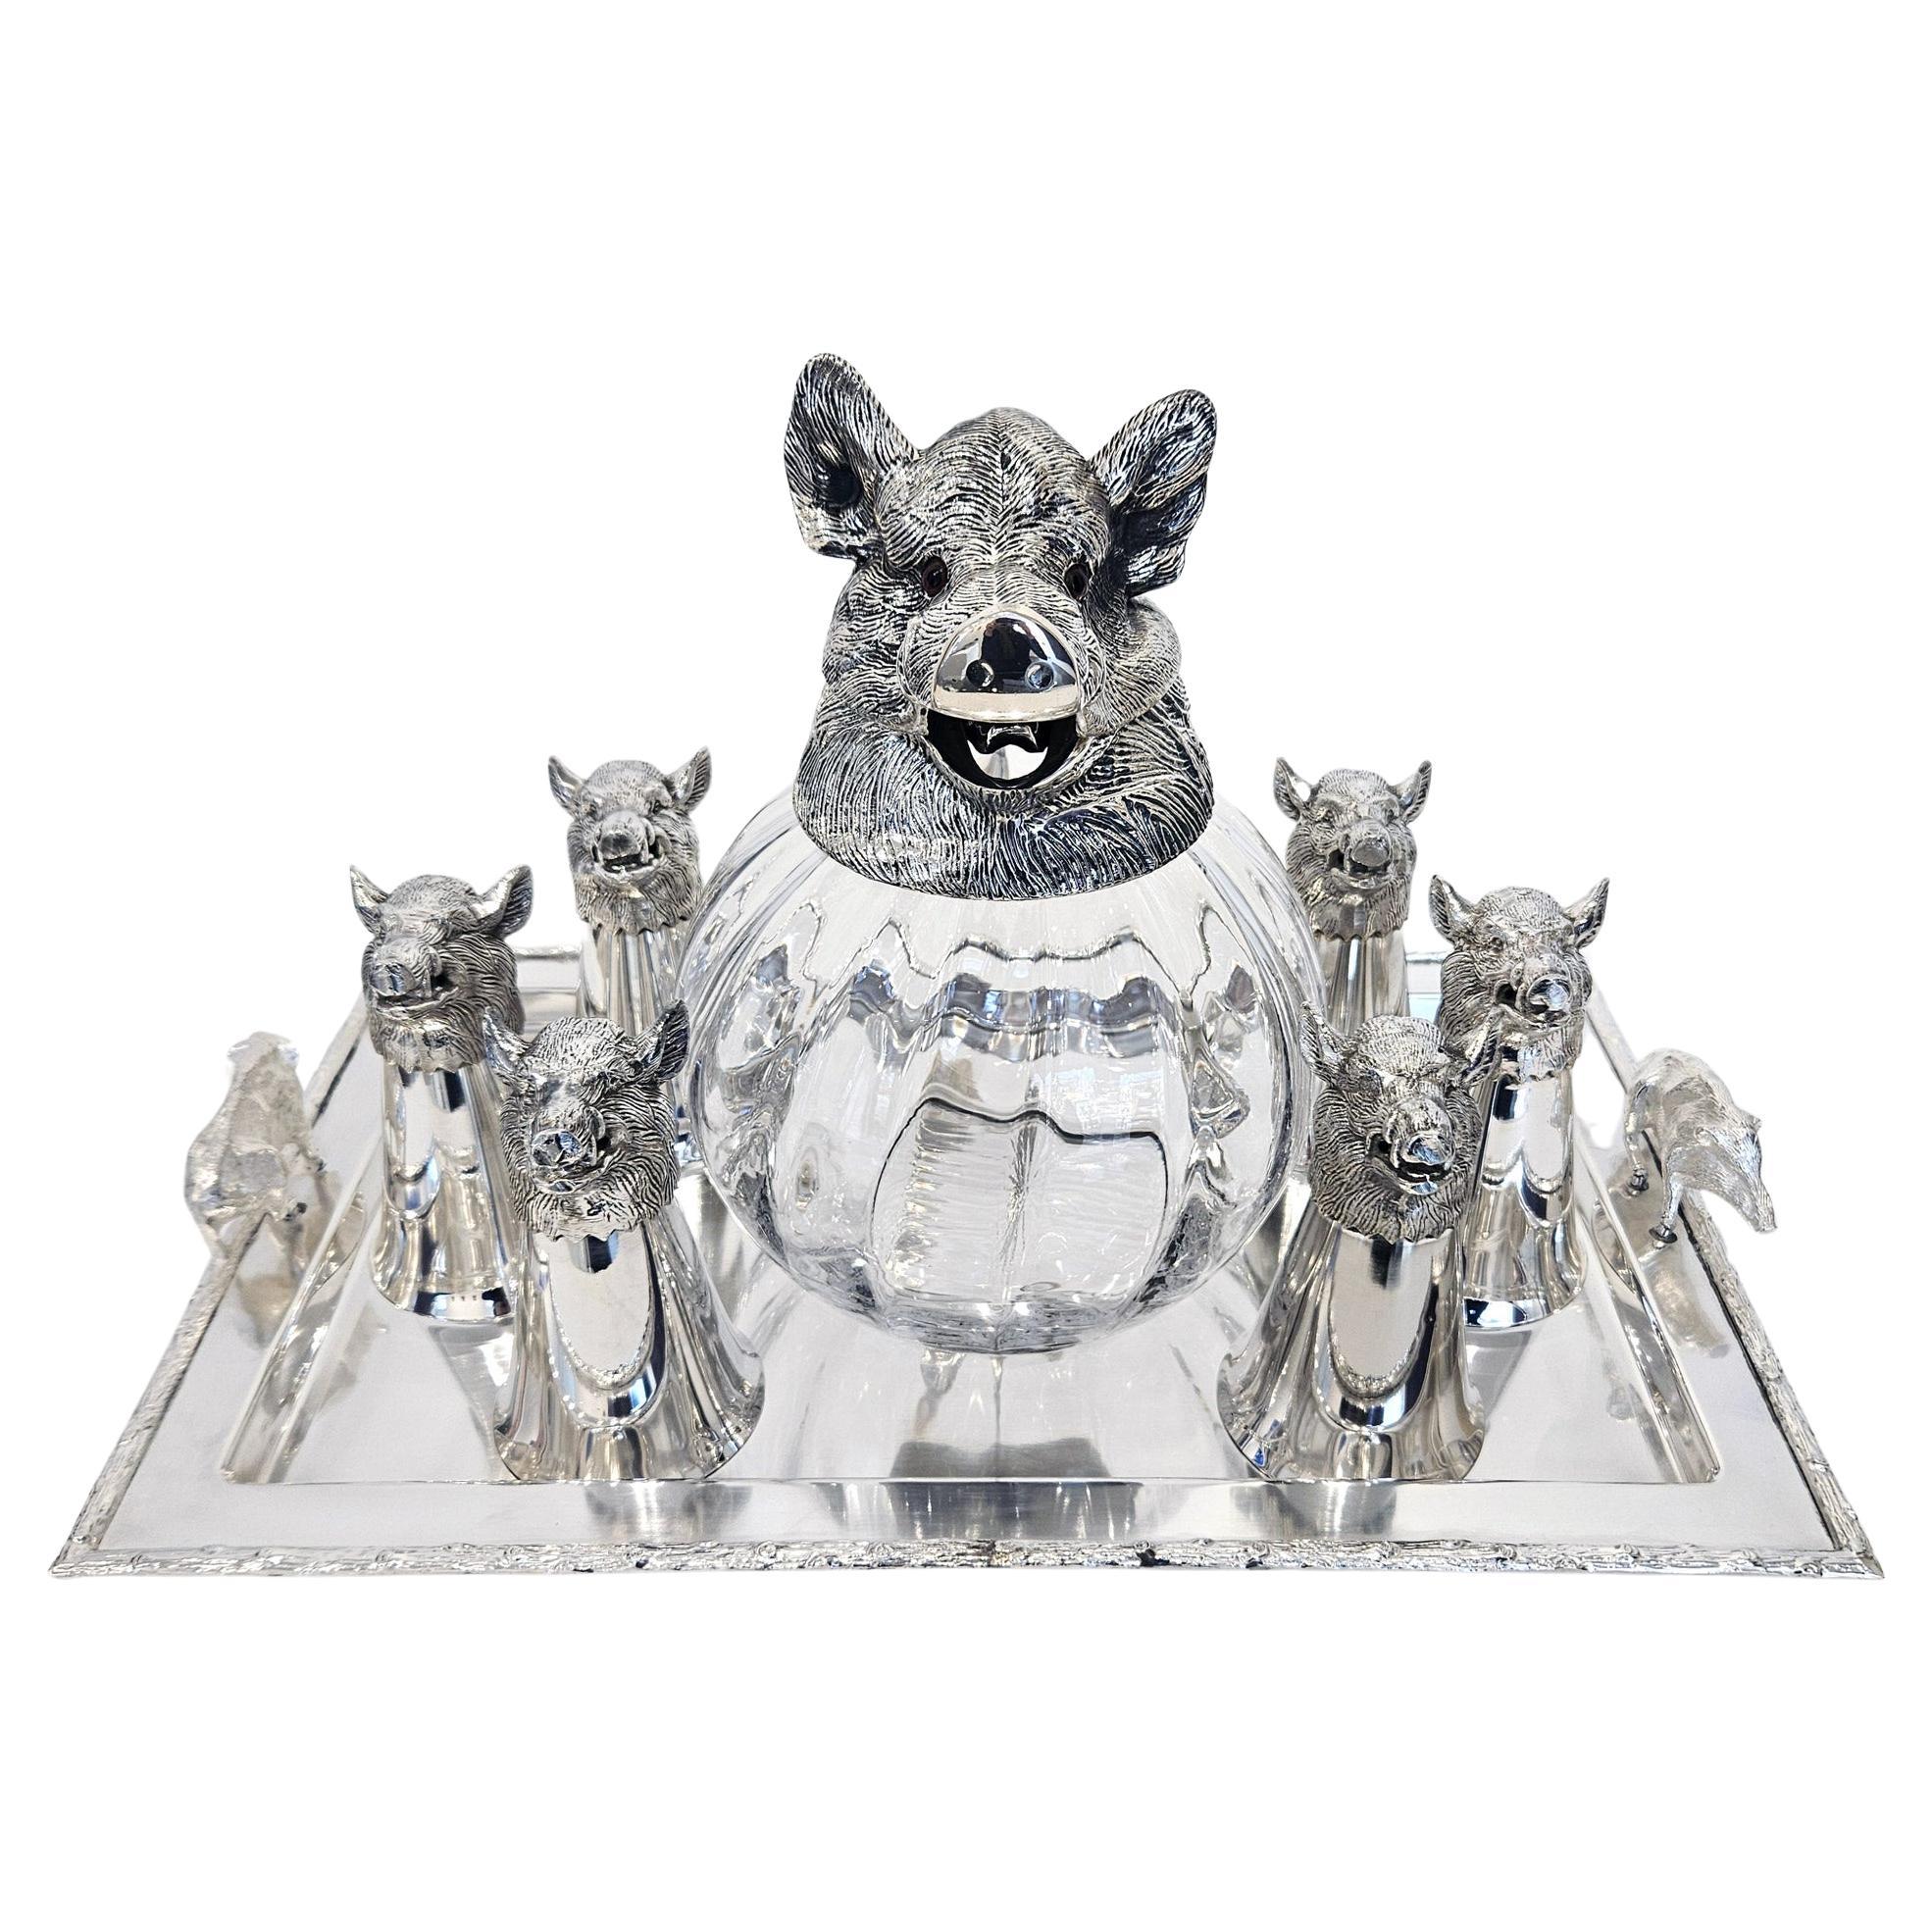 Wild Boar Drinks Set with Boar’s Head Decanter, Stirrup Cups and Tray, c. 1960 For Sale